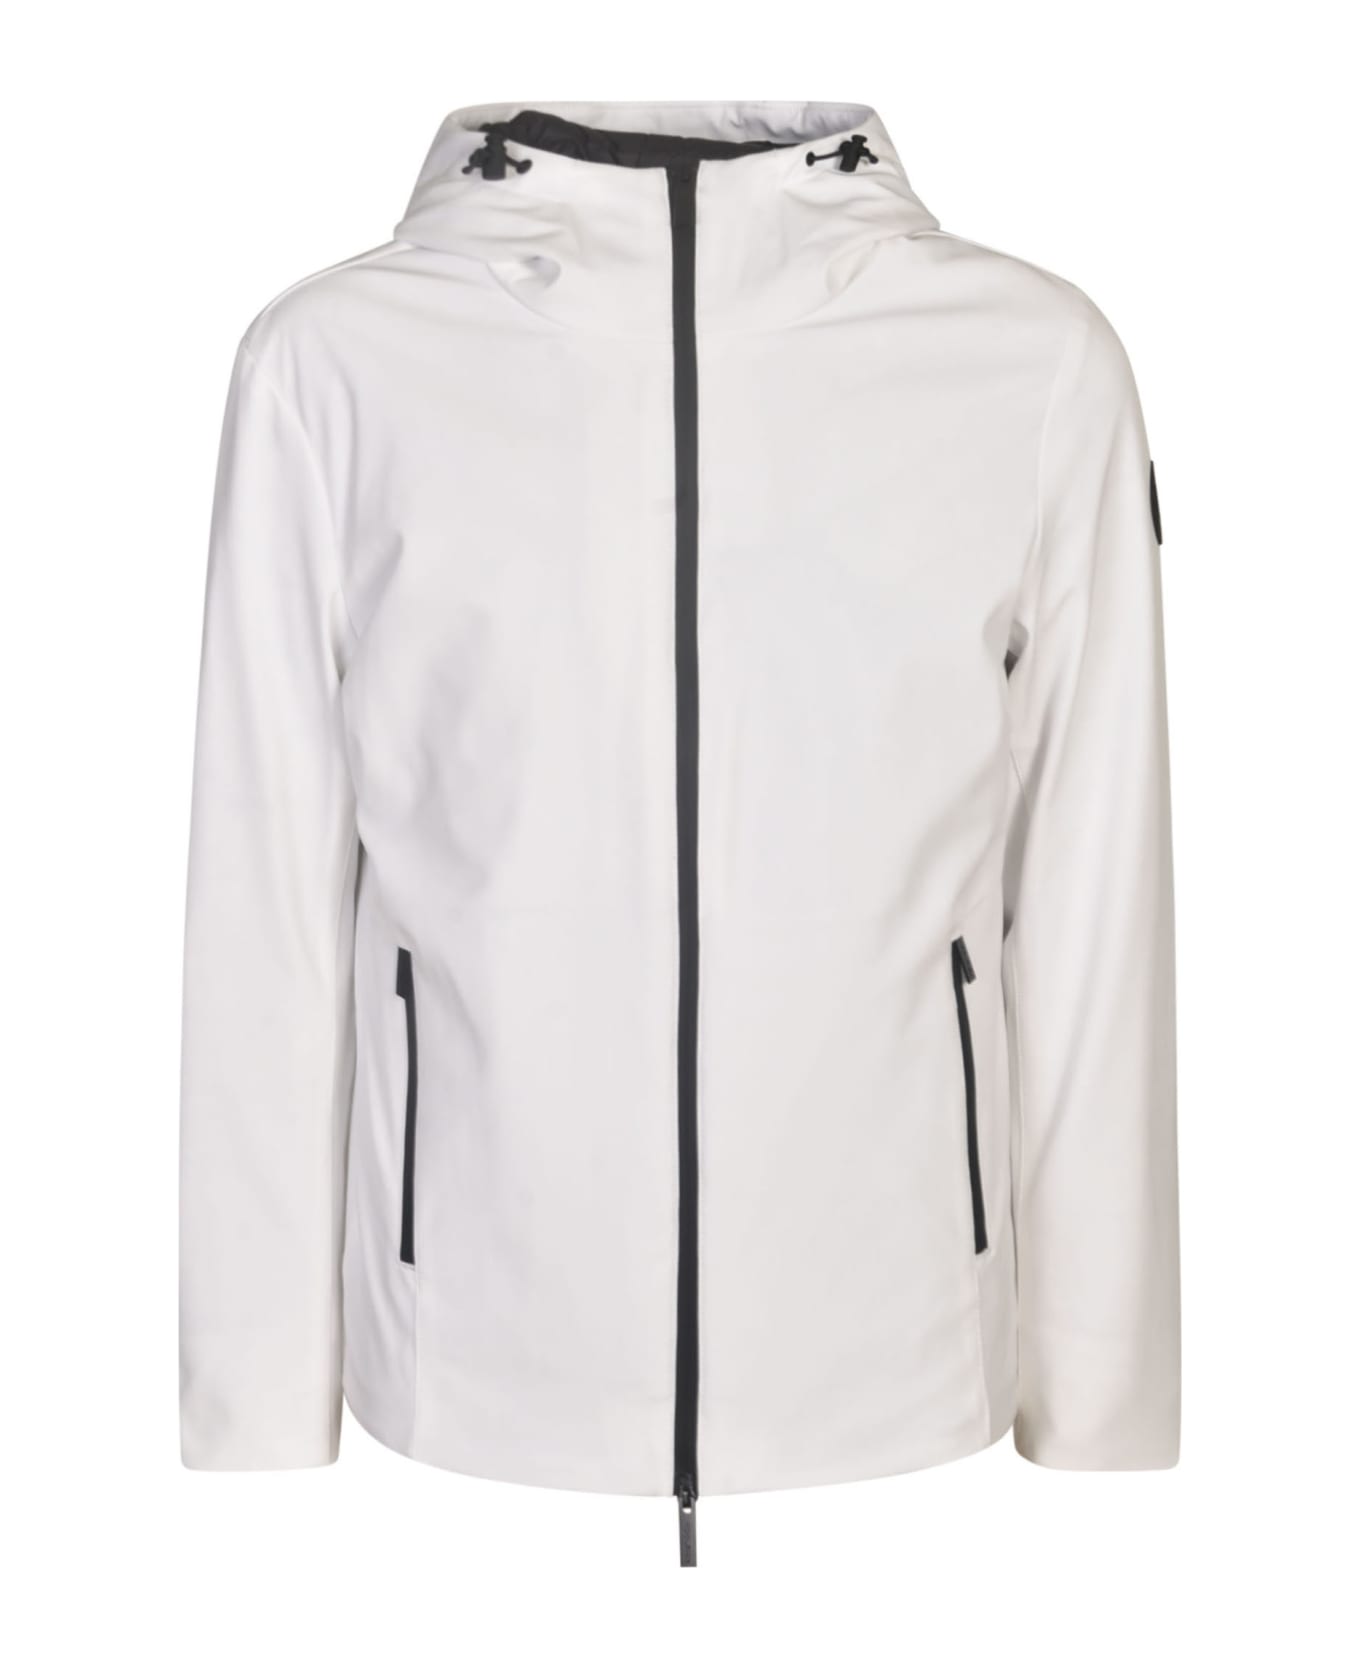 Woolrich Pacific Soft Shell Jacket - White